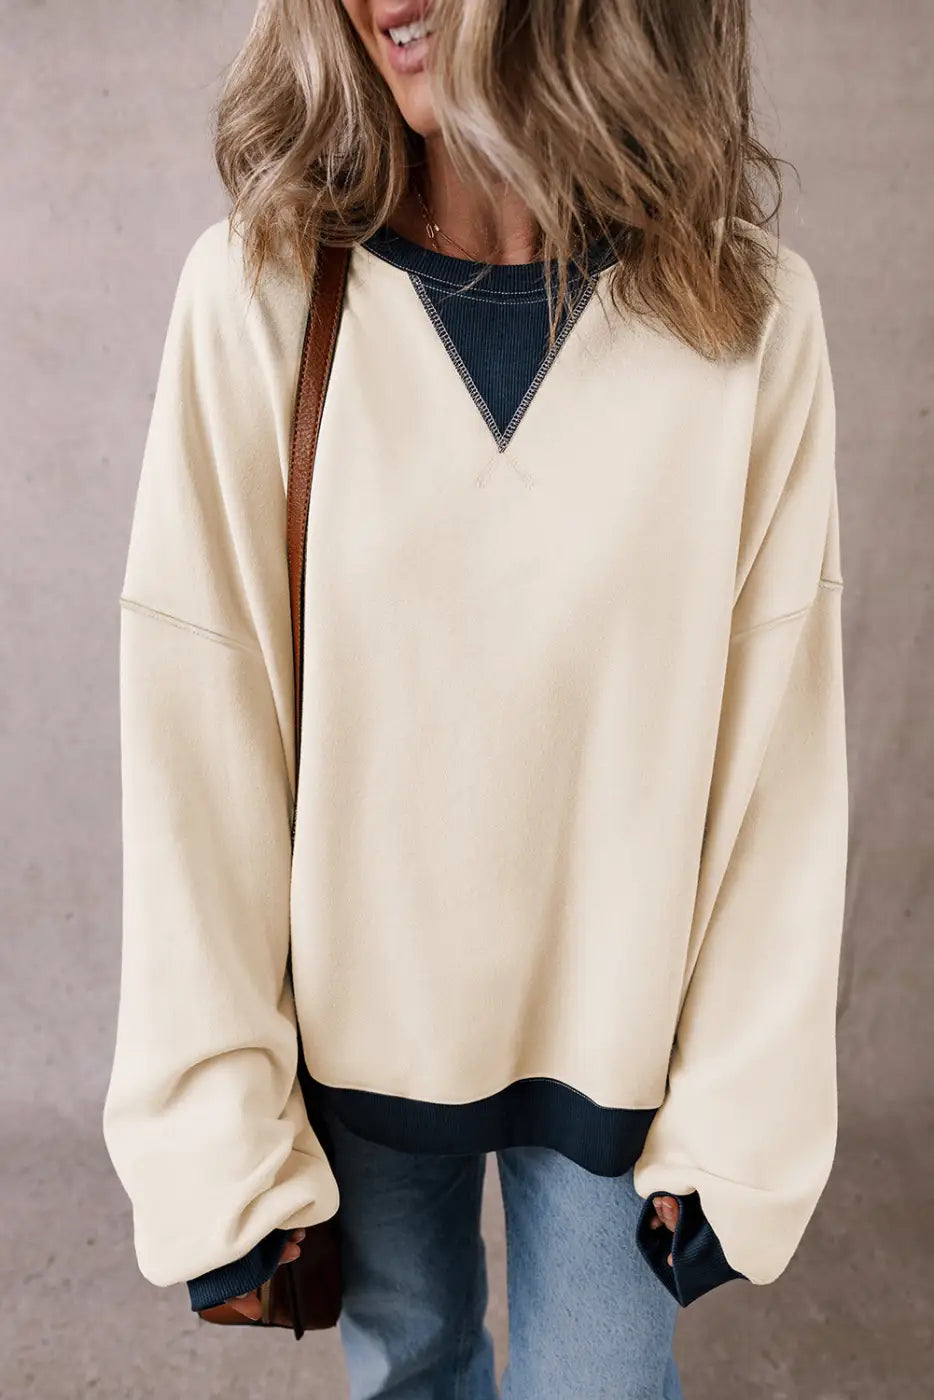 Cream-colored casual oversized sweatshirt with navy blue v-neck insert and cuffs